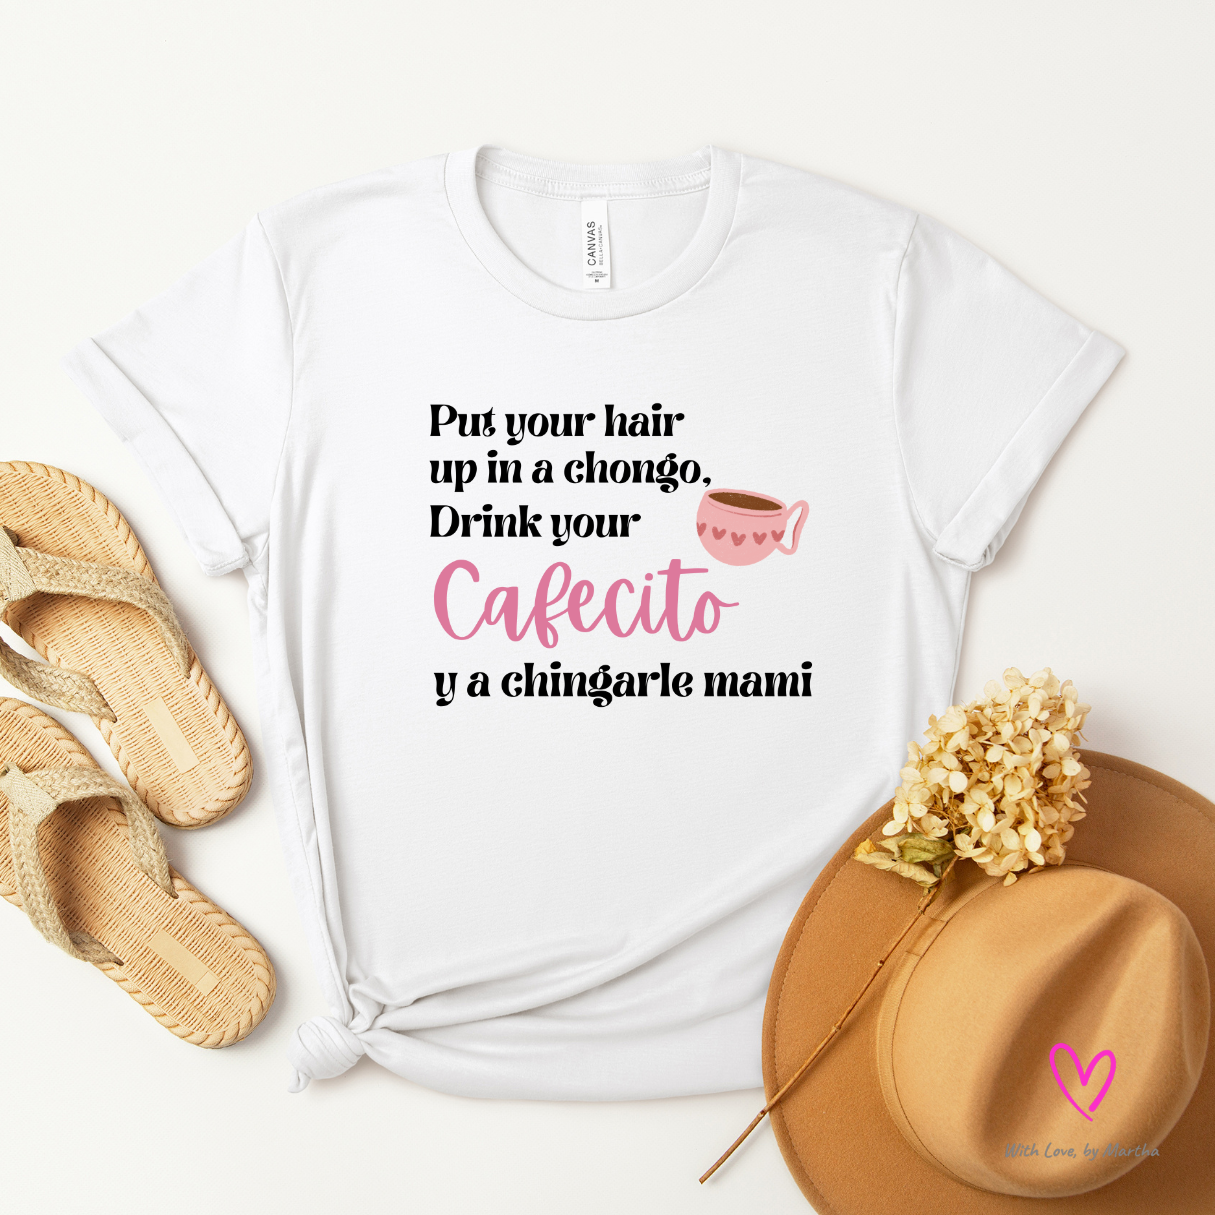 Put your hair up in a chongo, drink your cafecito y a chingarle mami T-shirt